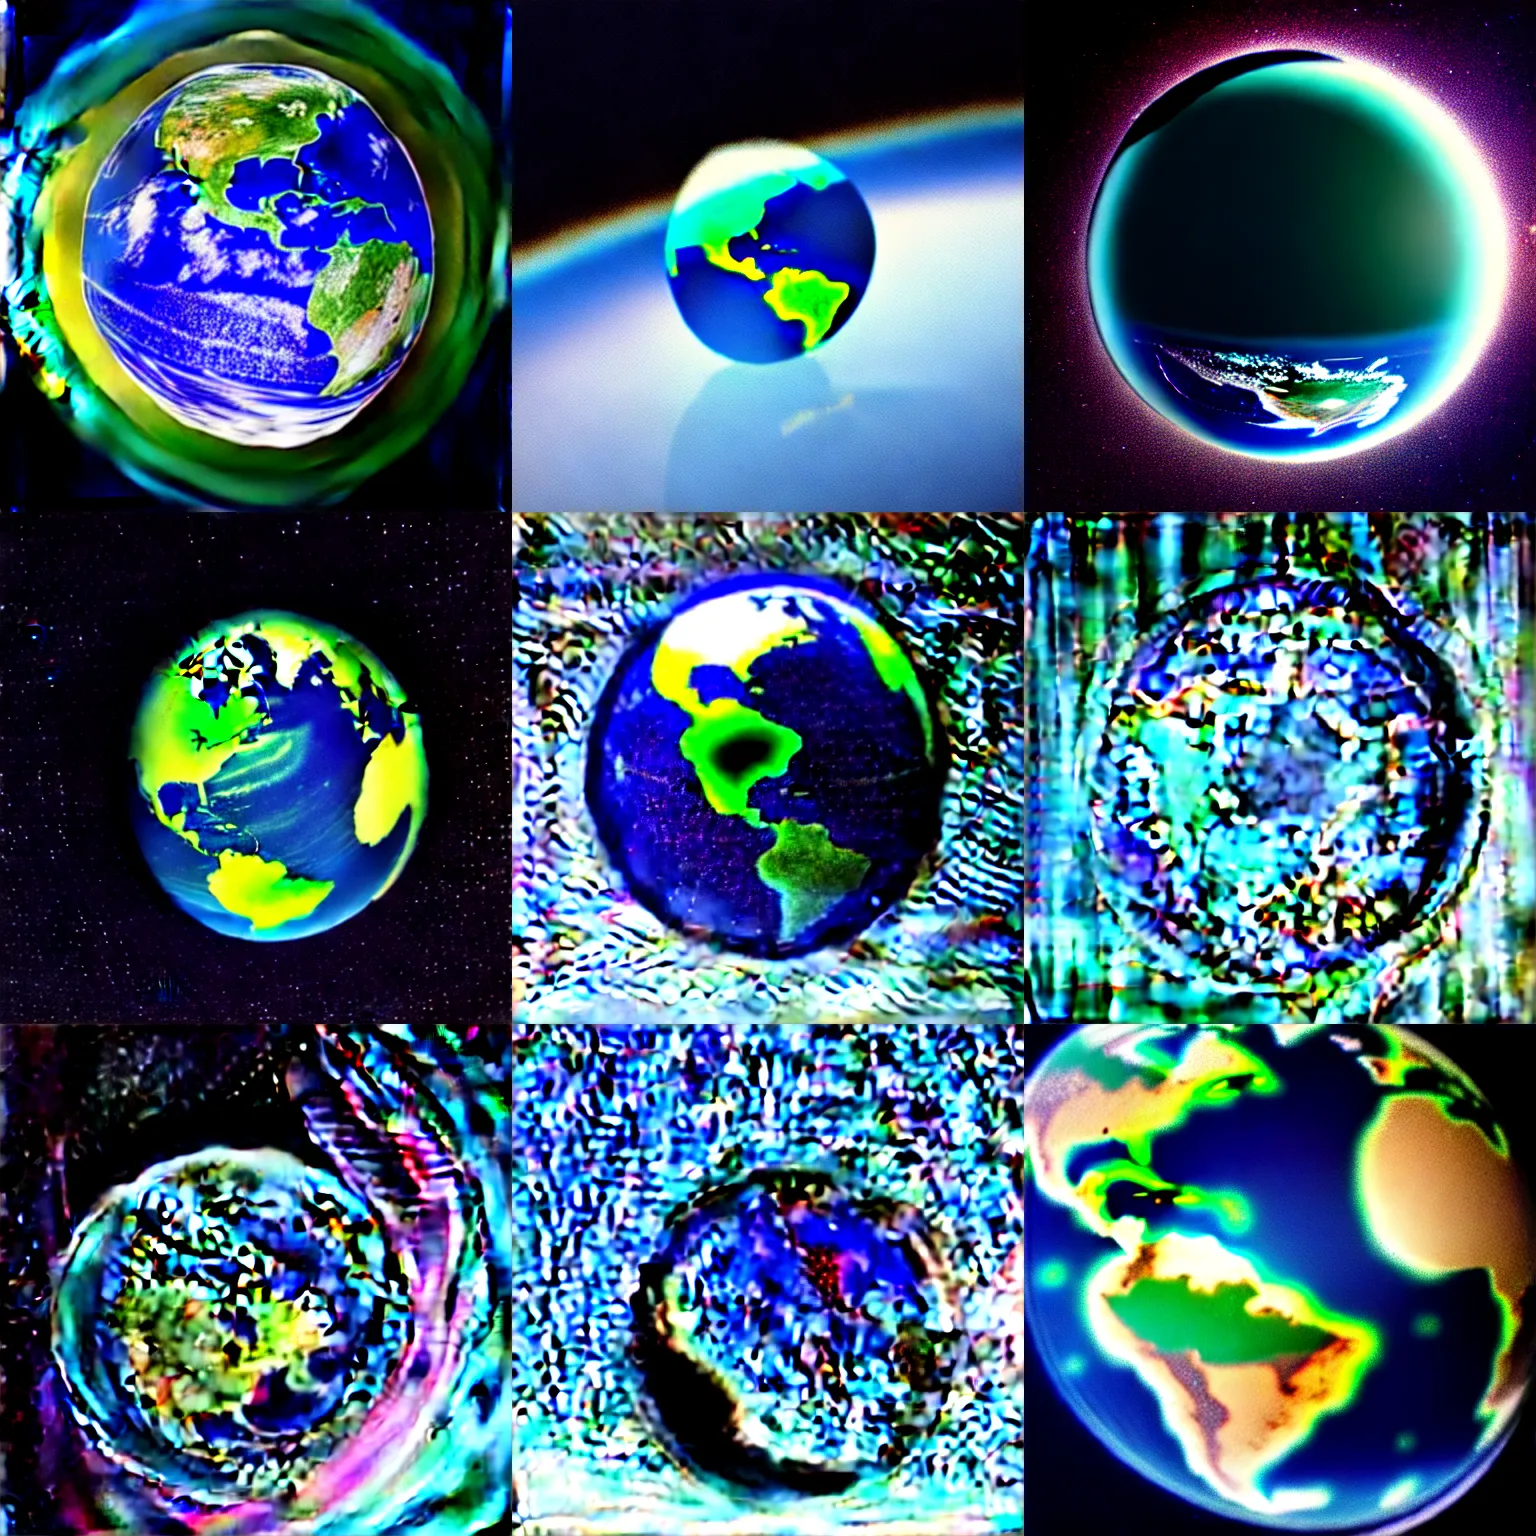 Prompt: photo of a planet earth made from glass